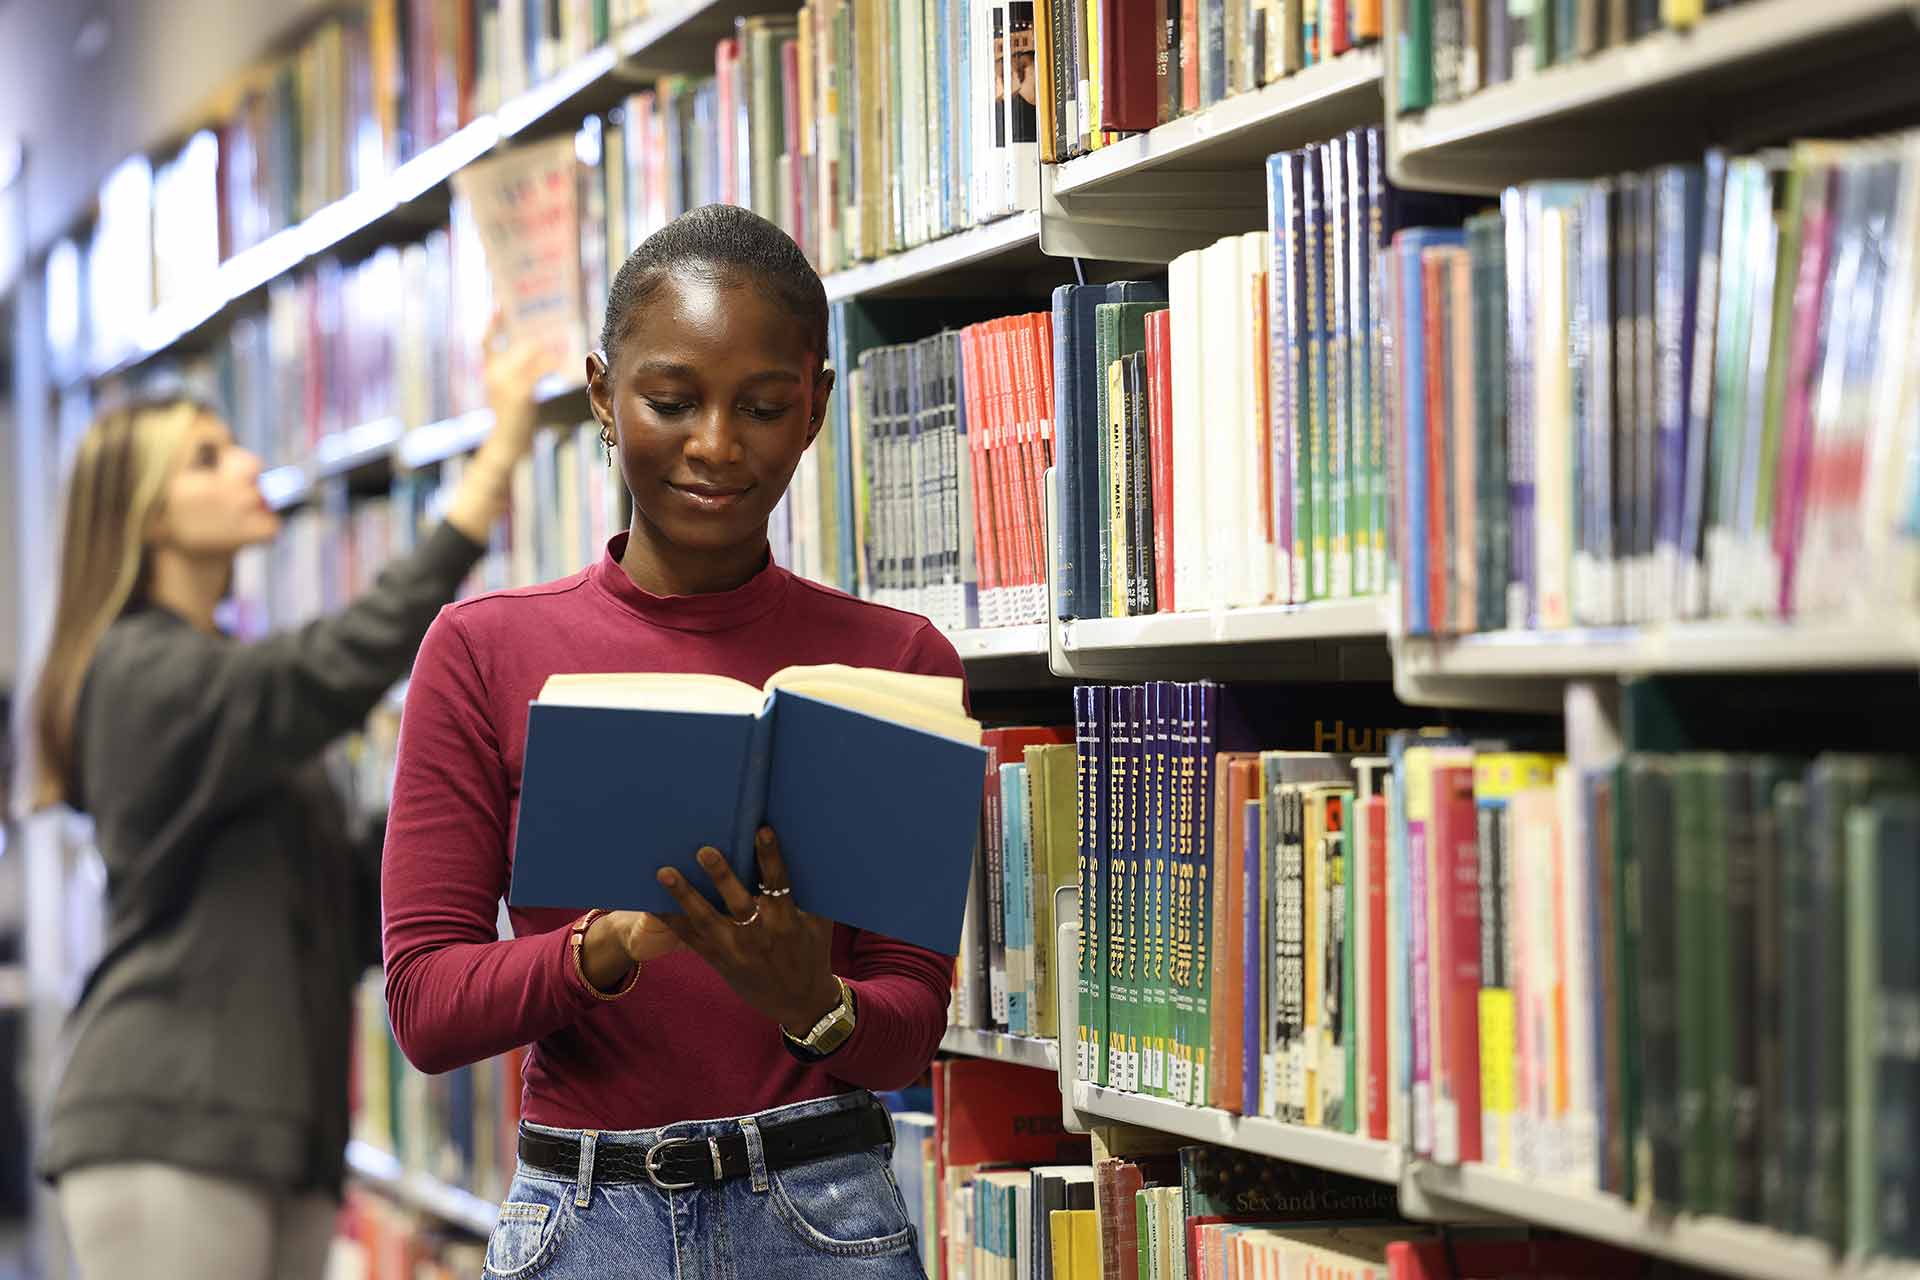 A student stands reading a book by book shelves in the library.